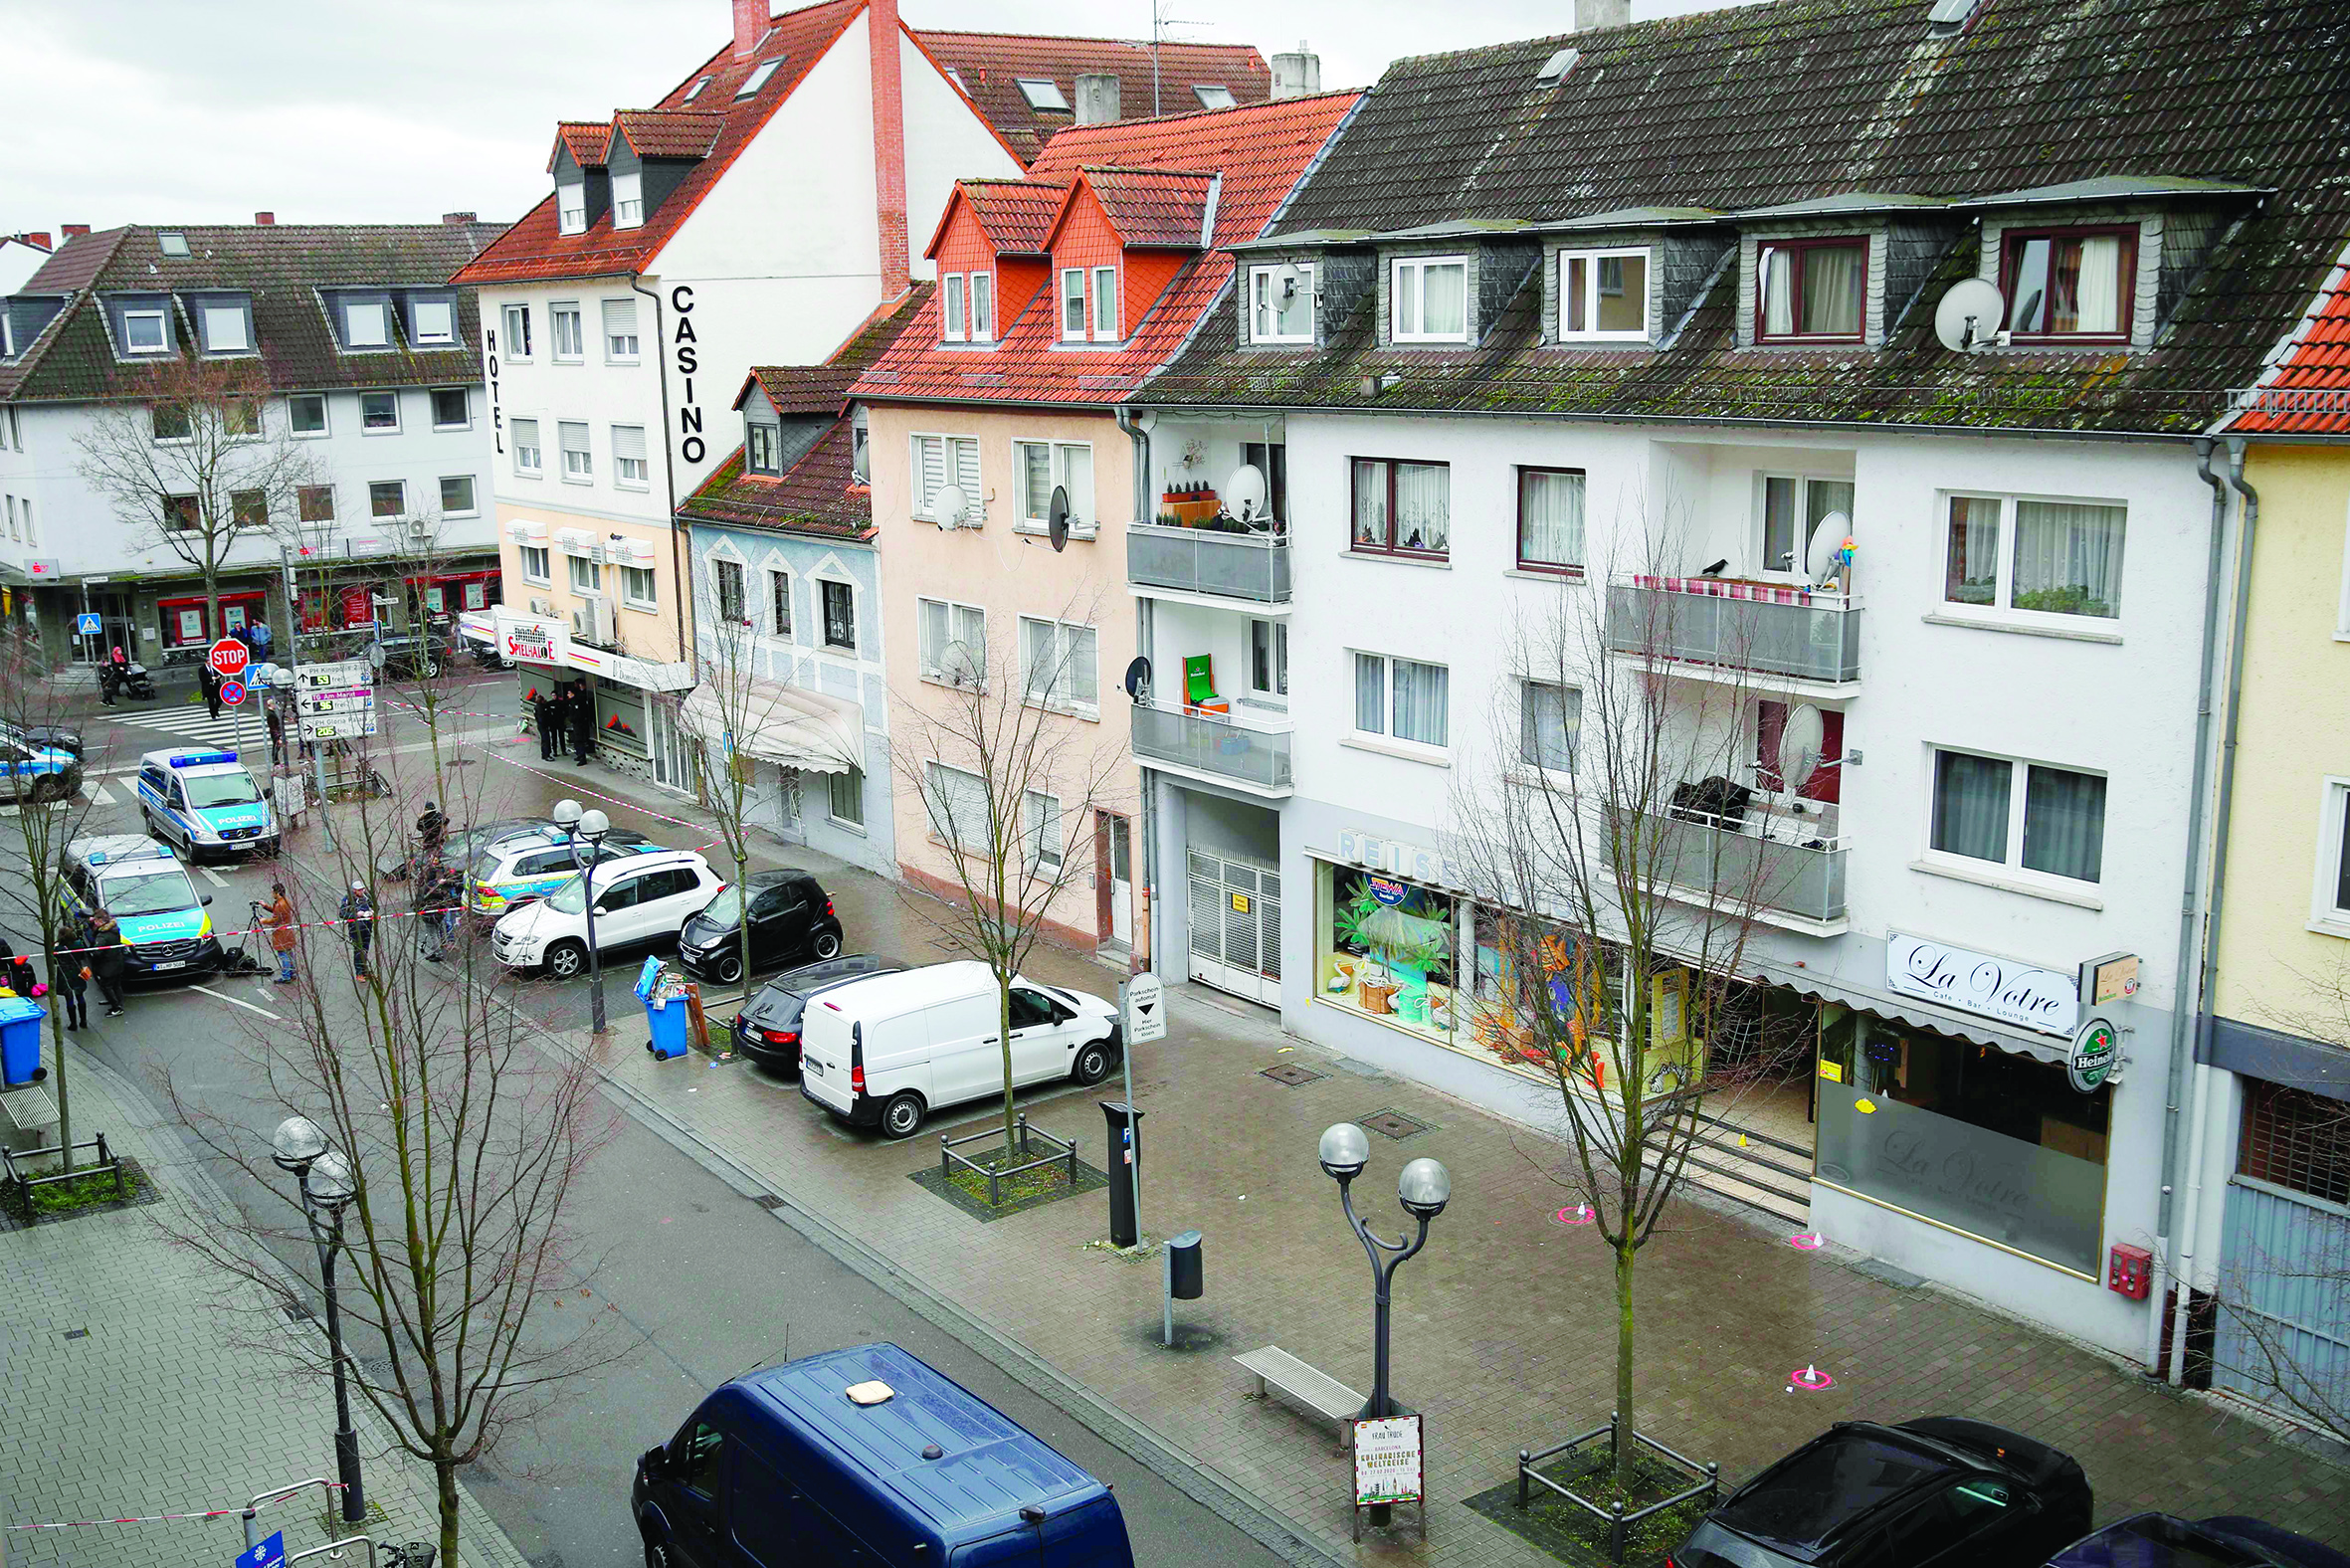 General view of the street where one of the bar (R) has been targeted in a shooting at the Heumarkt in the centre of Hanau, near Frankfurt am Main, western Germany, on February 20, 2020, after at least nine people were killed in two shootings late on February 19, 2020. - The suspect in two shootings in Germany that killed at least nine people was found dead at home, police said on February 20, 2020. At least nine people were killed in two shootings late on February 19 in Hanau, near the German city of Frankfurt. (Photo by Odd ANDERSEN / AFP)